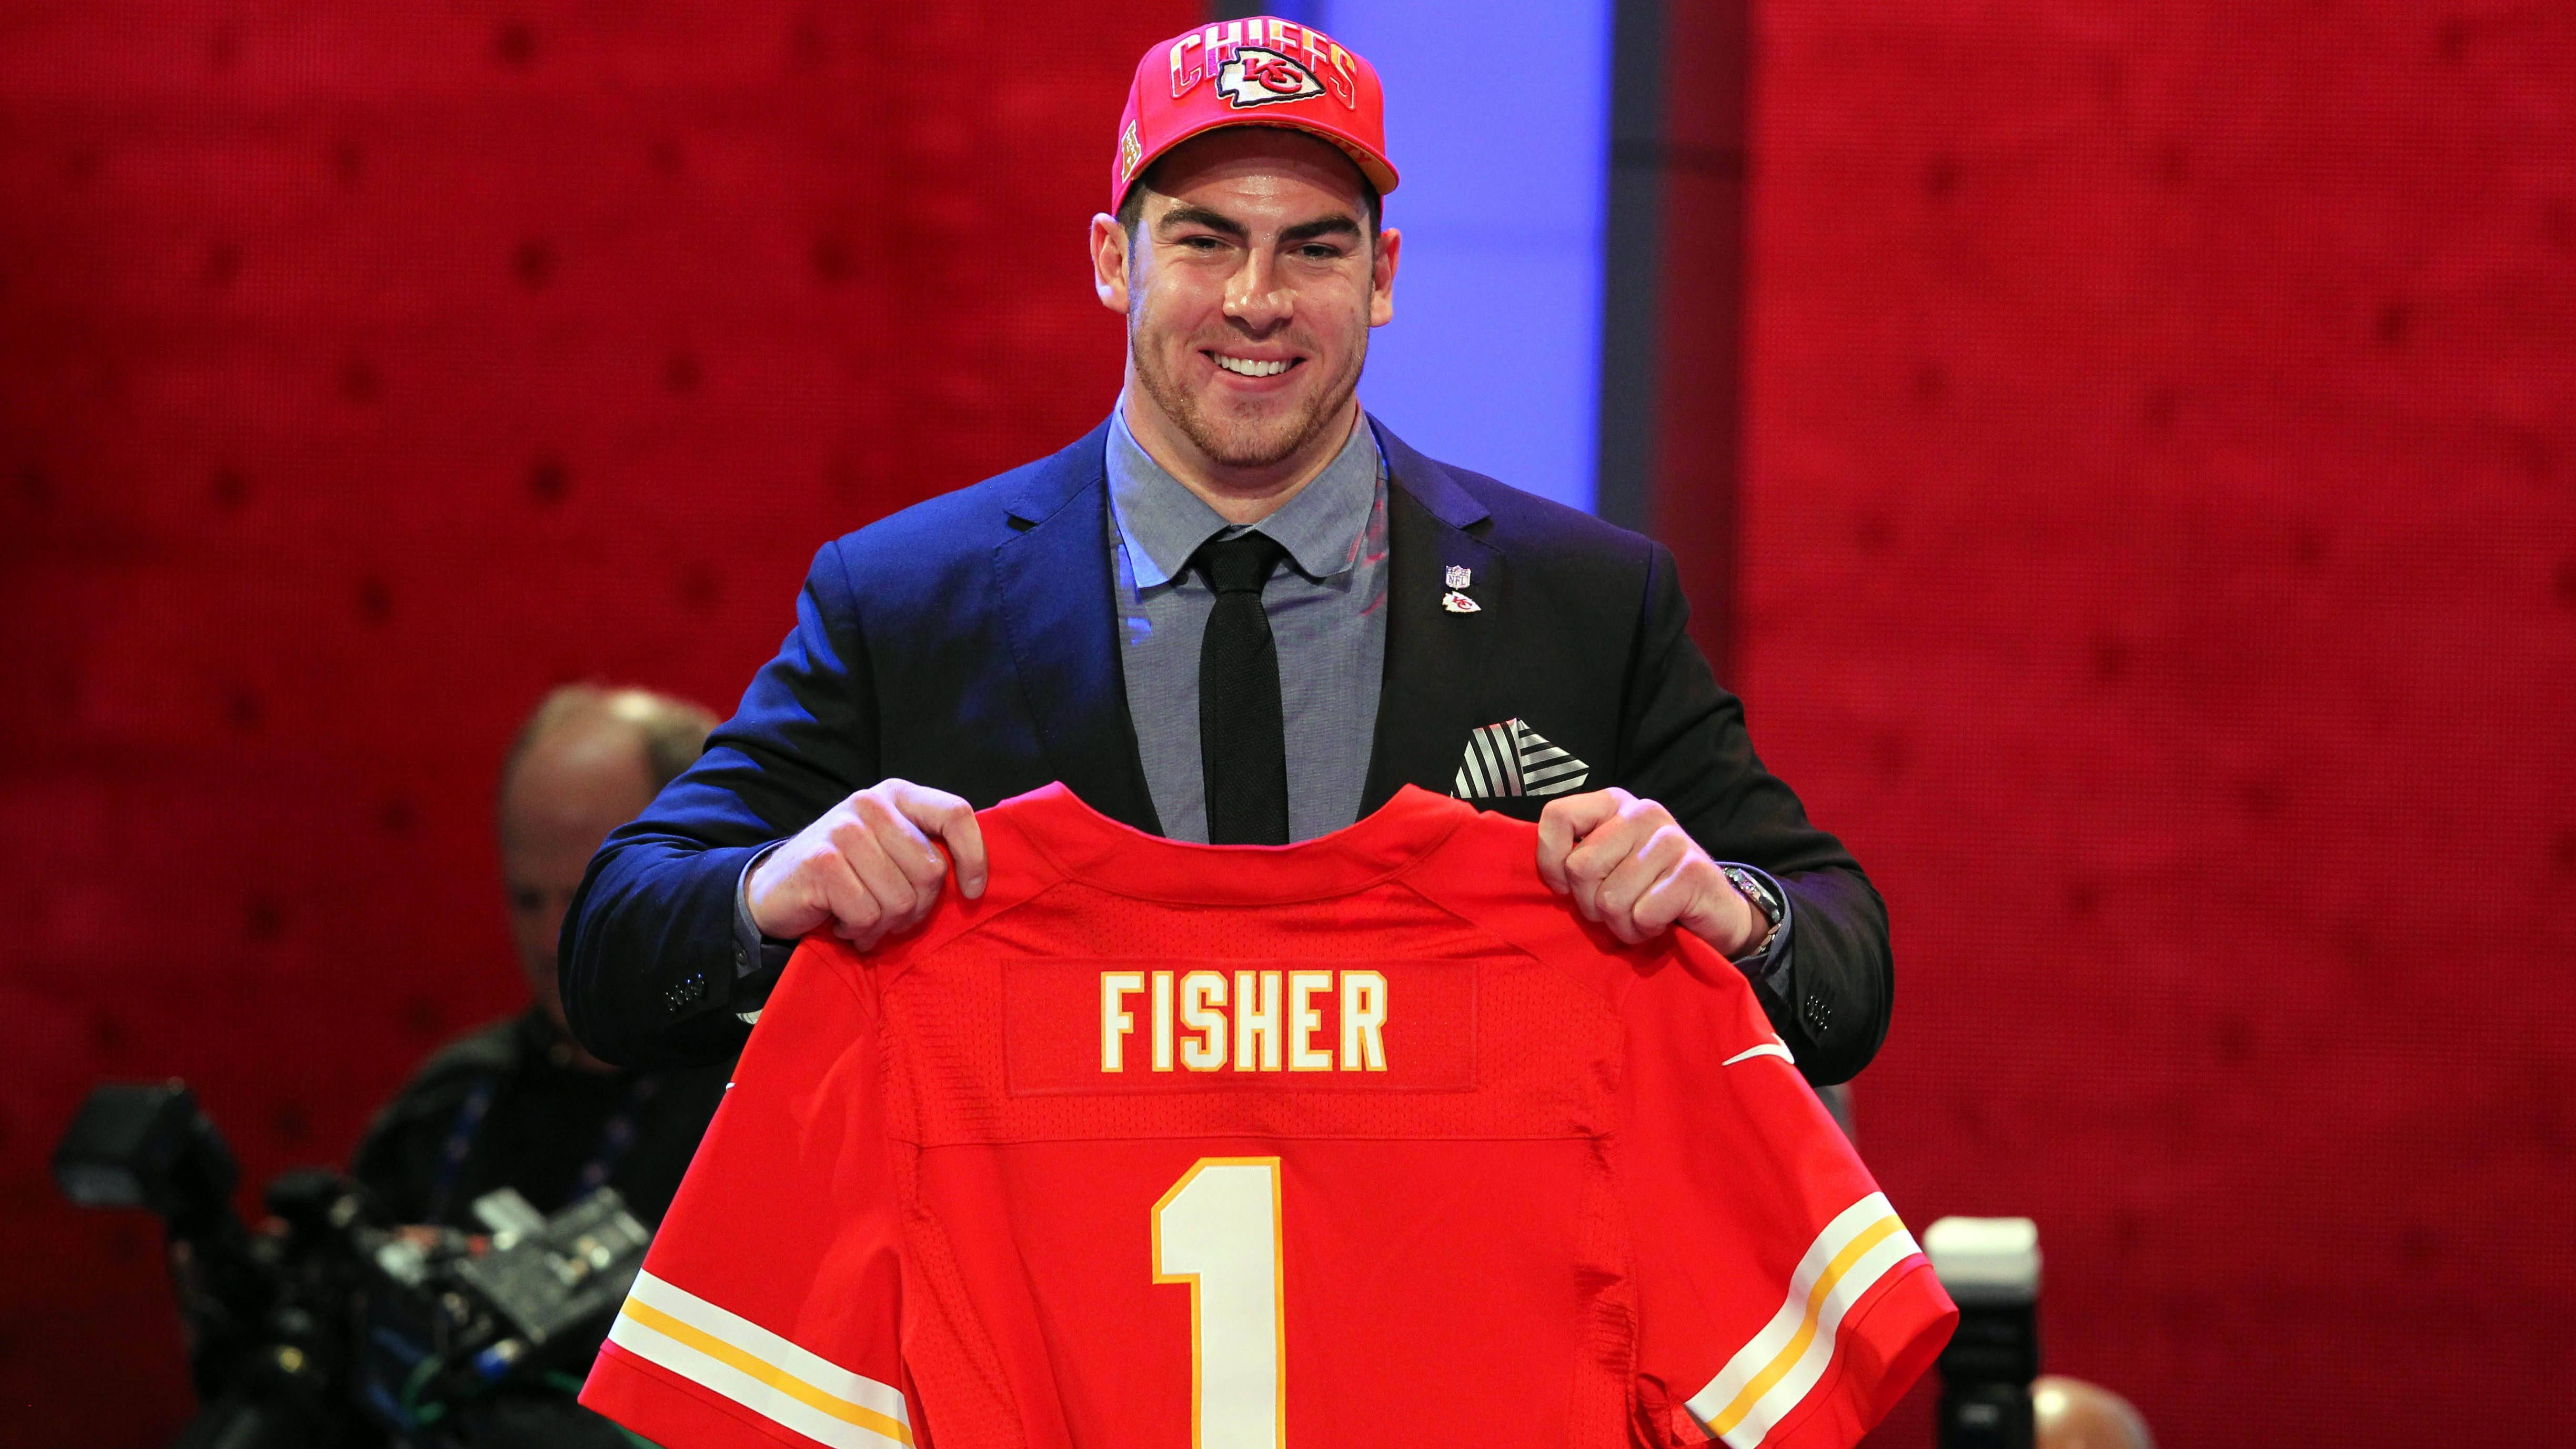 <strong>Eric Fisher - 2013</strong><br>Position: Offensive Tackle<br>Draft-Team: Kansas City Chiefs<br>Erfolge: 2x Pro Bowl, Super Bowl Champion<br>Karriereende: 2022